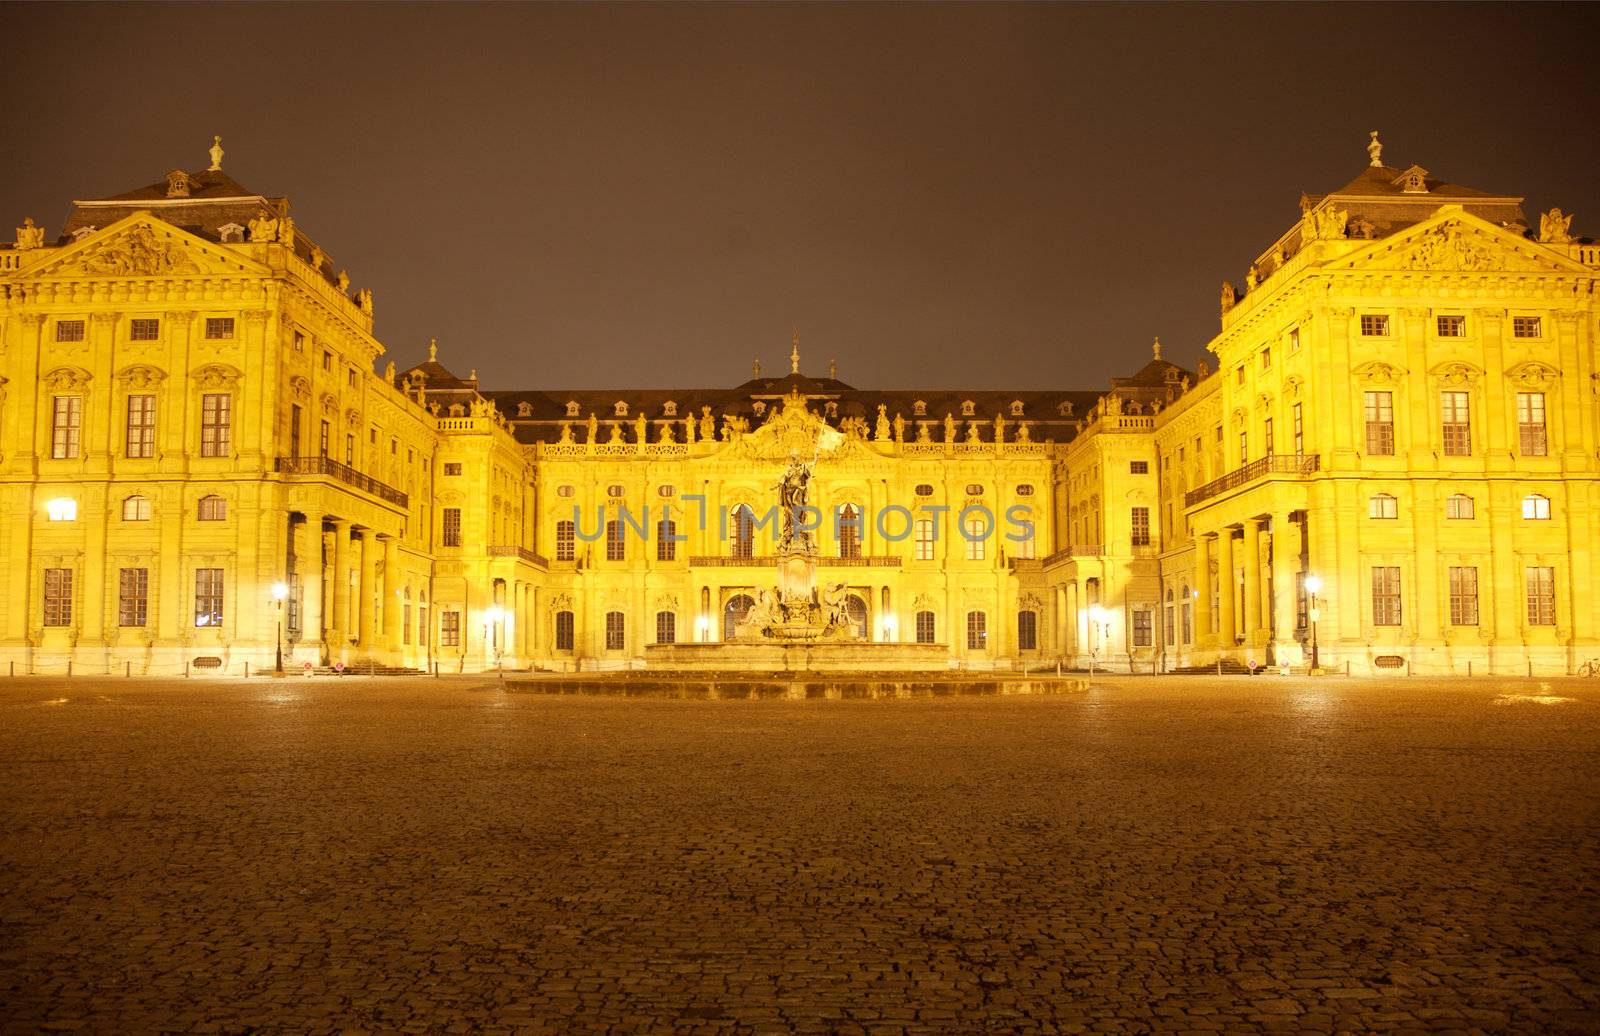 At the Residenz Palace
 by jackryan89